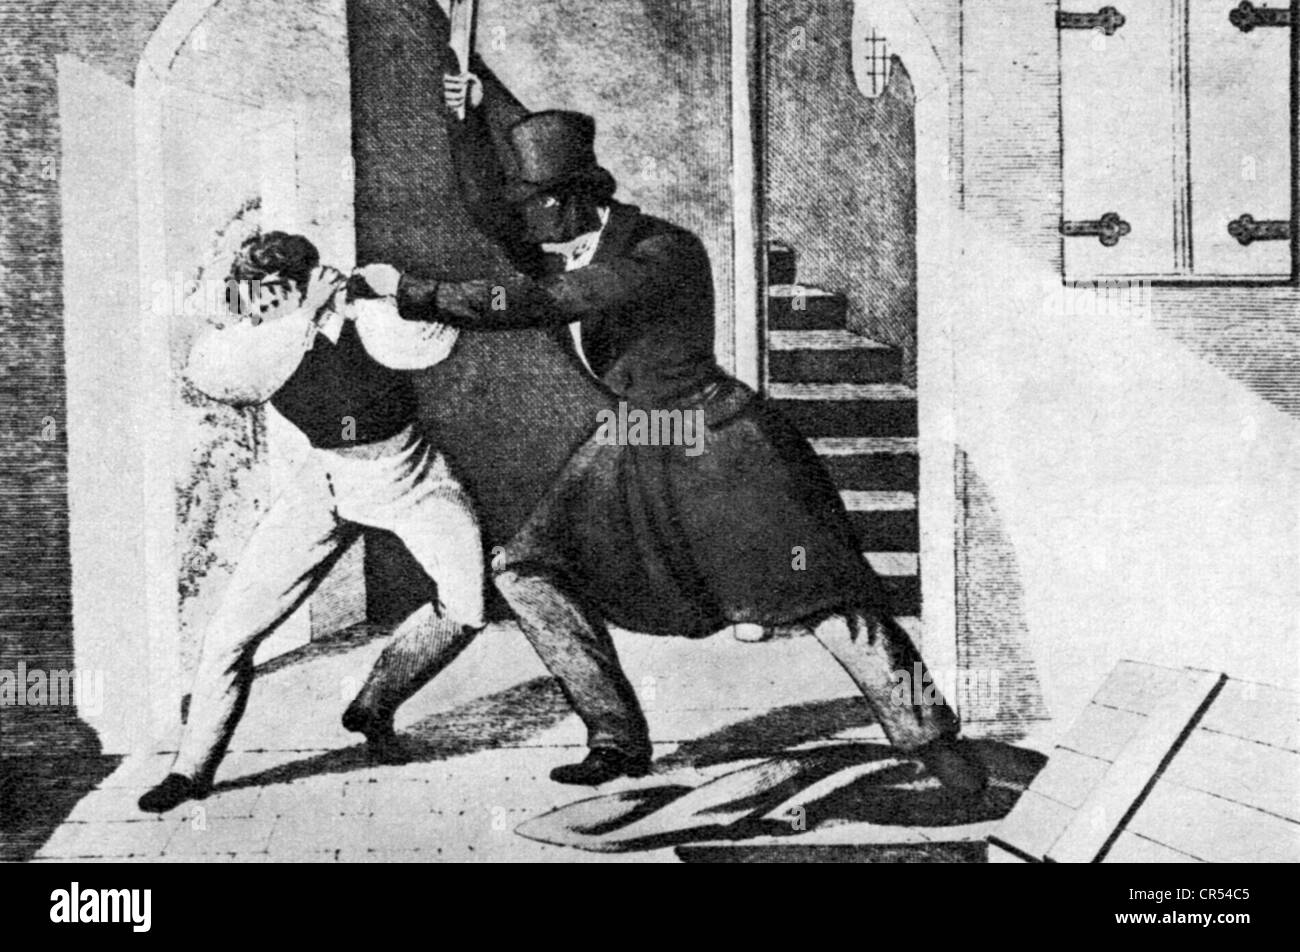 Hauser, Kaspar, 30.4.1812 - 17.12.1833, German foundling, scene, Hauer is attacked in the house of his teacher Daumer, 17.10.1829, Stock Photo